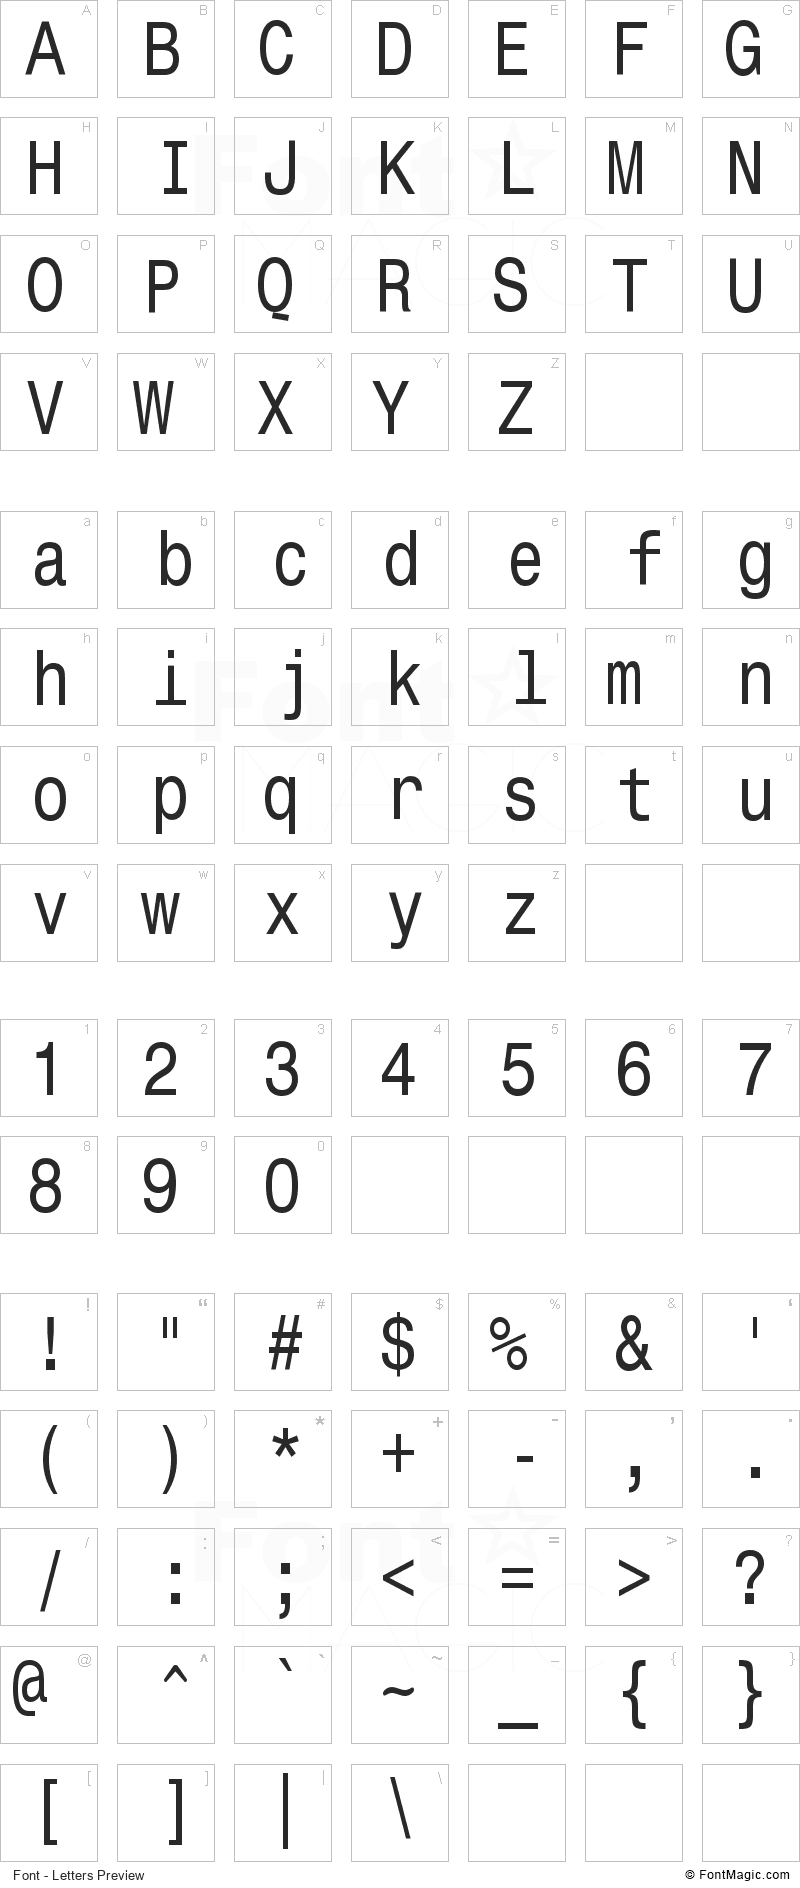 Monospace Typewriter Font - All Latters Preview Chart